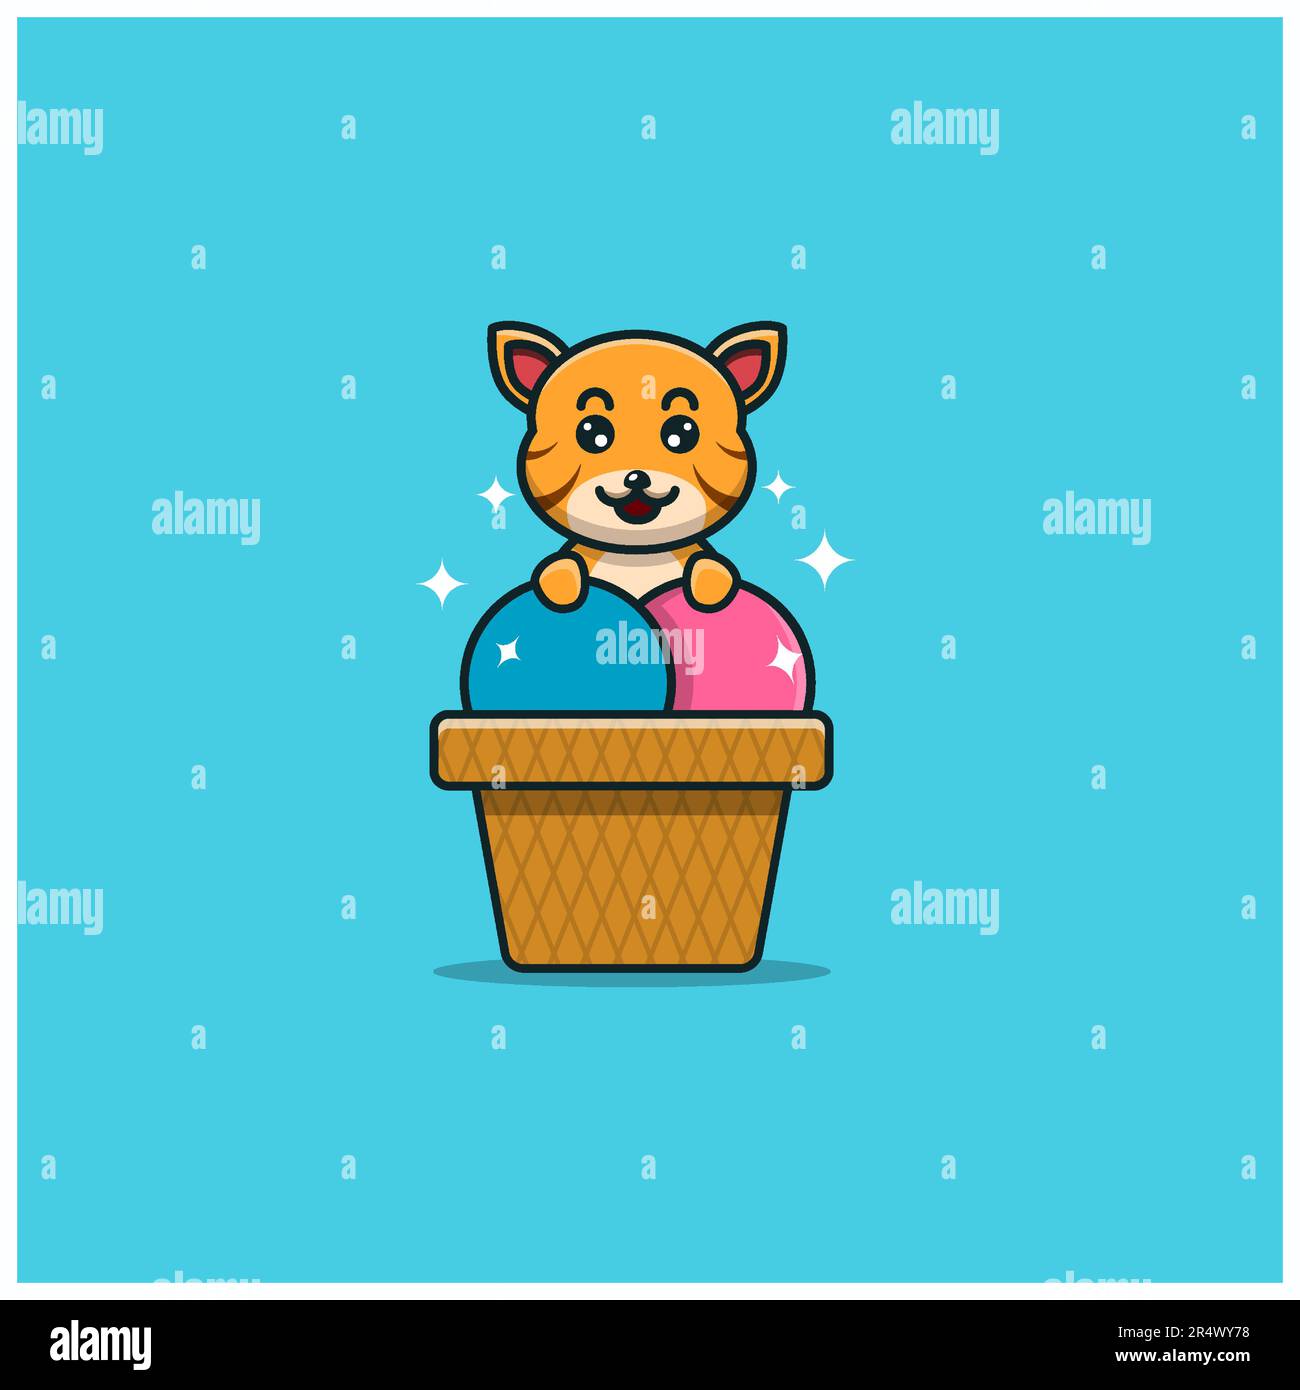 https://c8.alamy.com/comp/2R4WY78/cute-baby-tiger-on-ice-cream-character-mascot-icon-and-cute-design-vector-and-illustration-2R4WY78.jpg